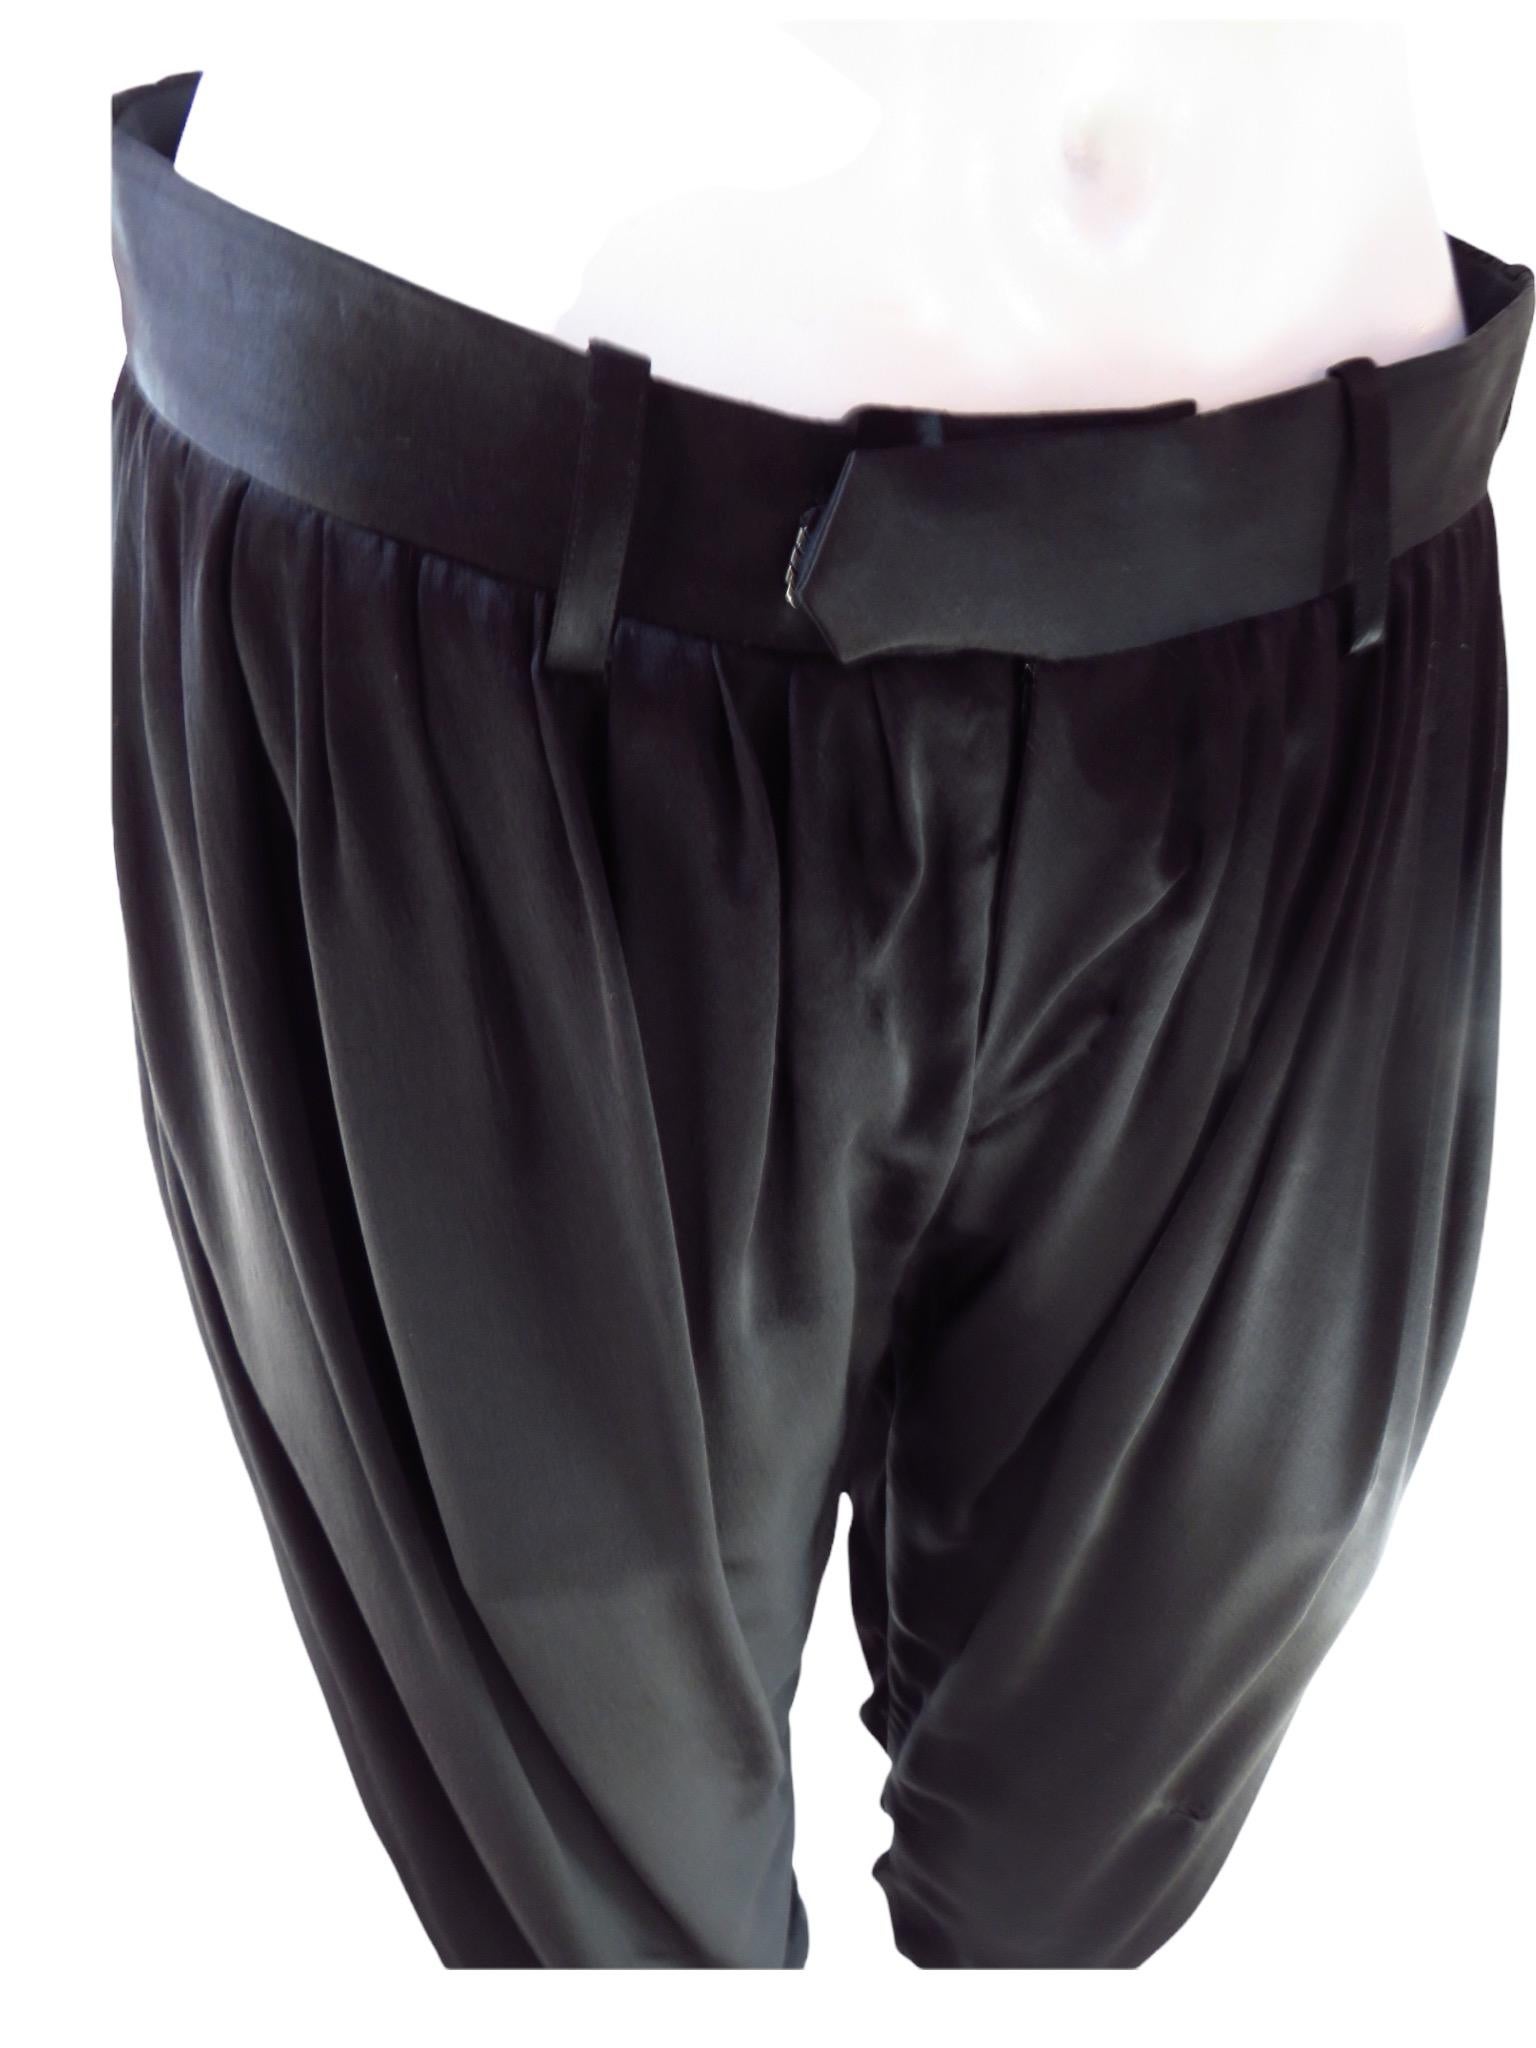 Undercover Black Pleated Silk Harem Pants For Sale 5